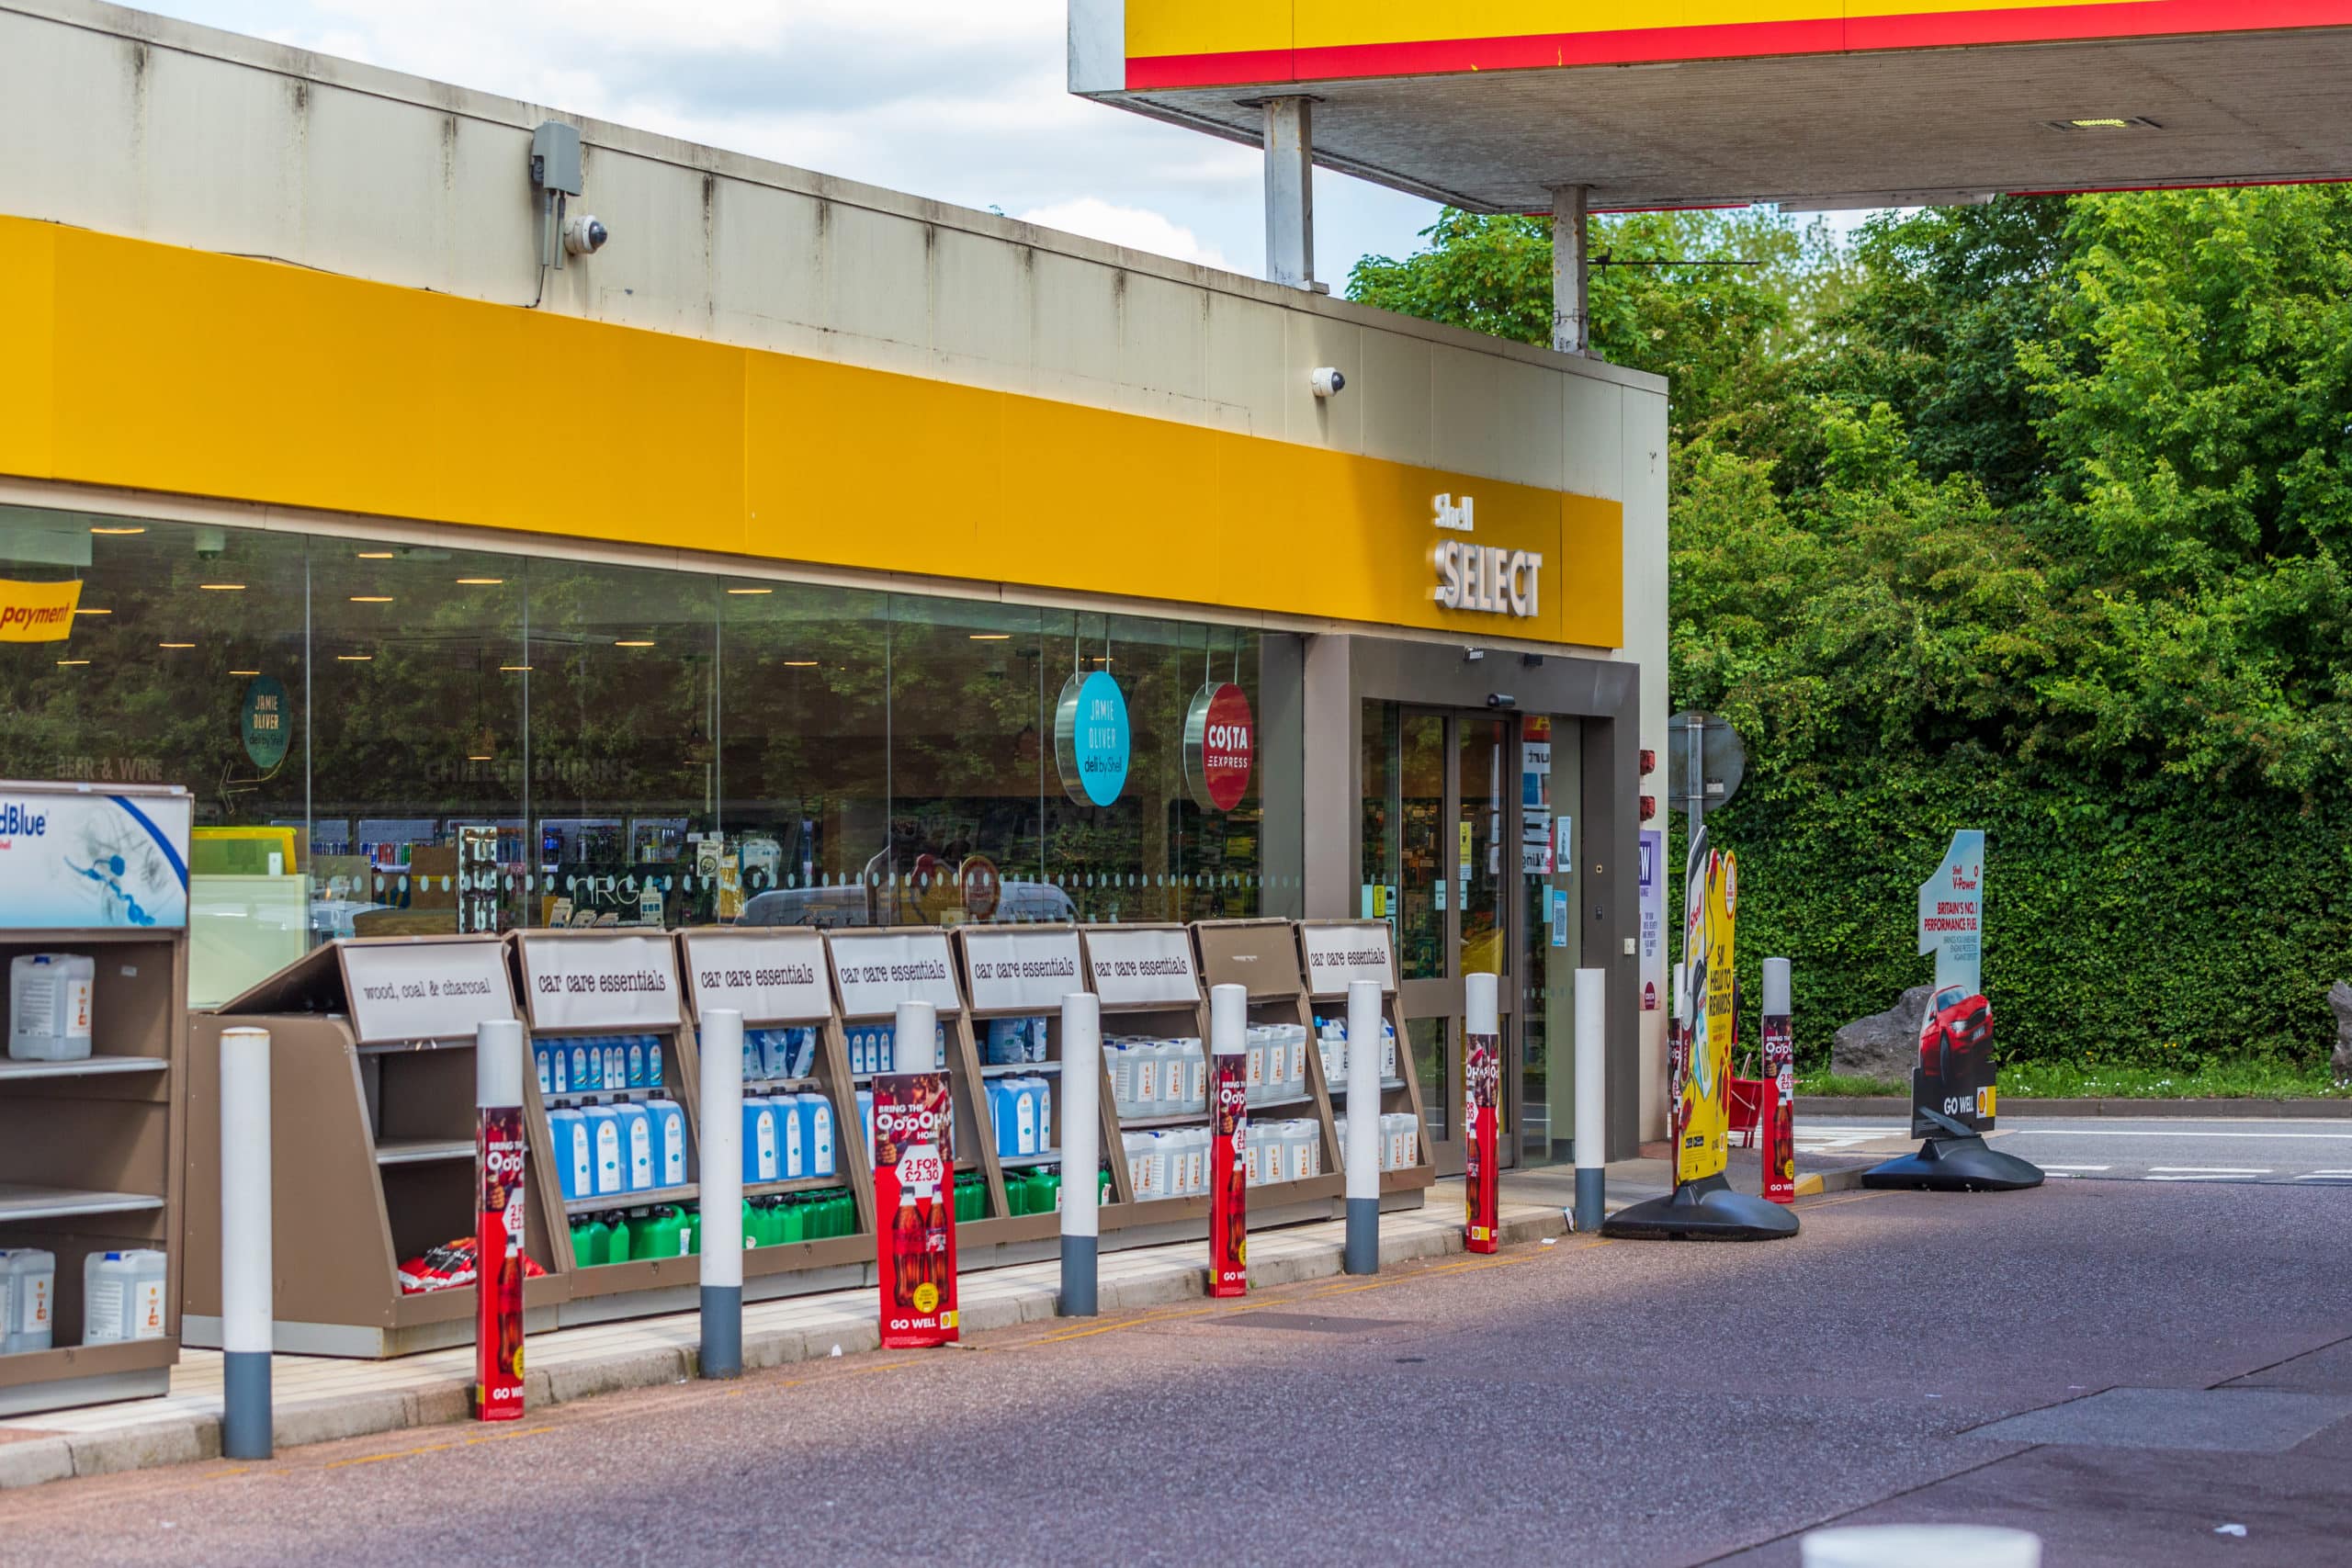 An image of the Cullompton services fuel station